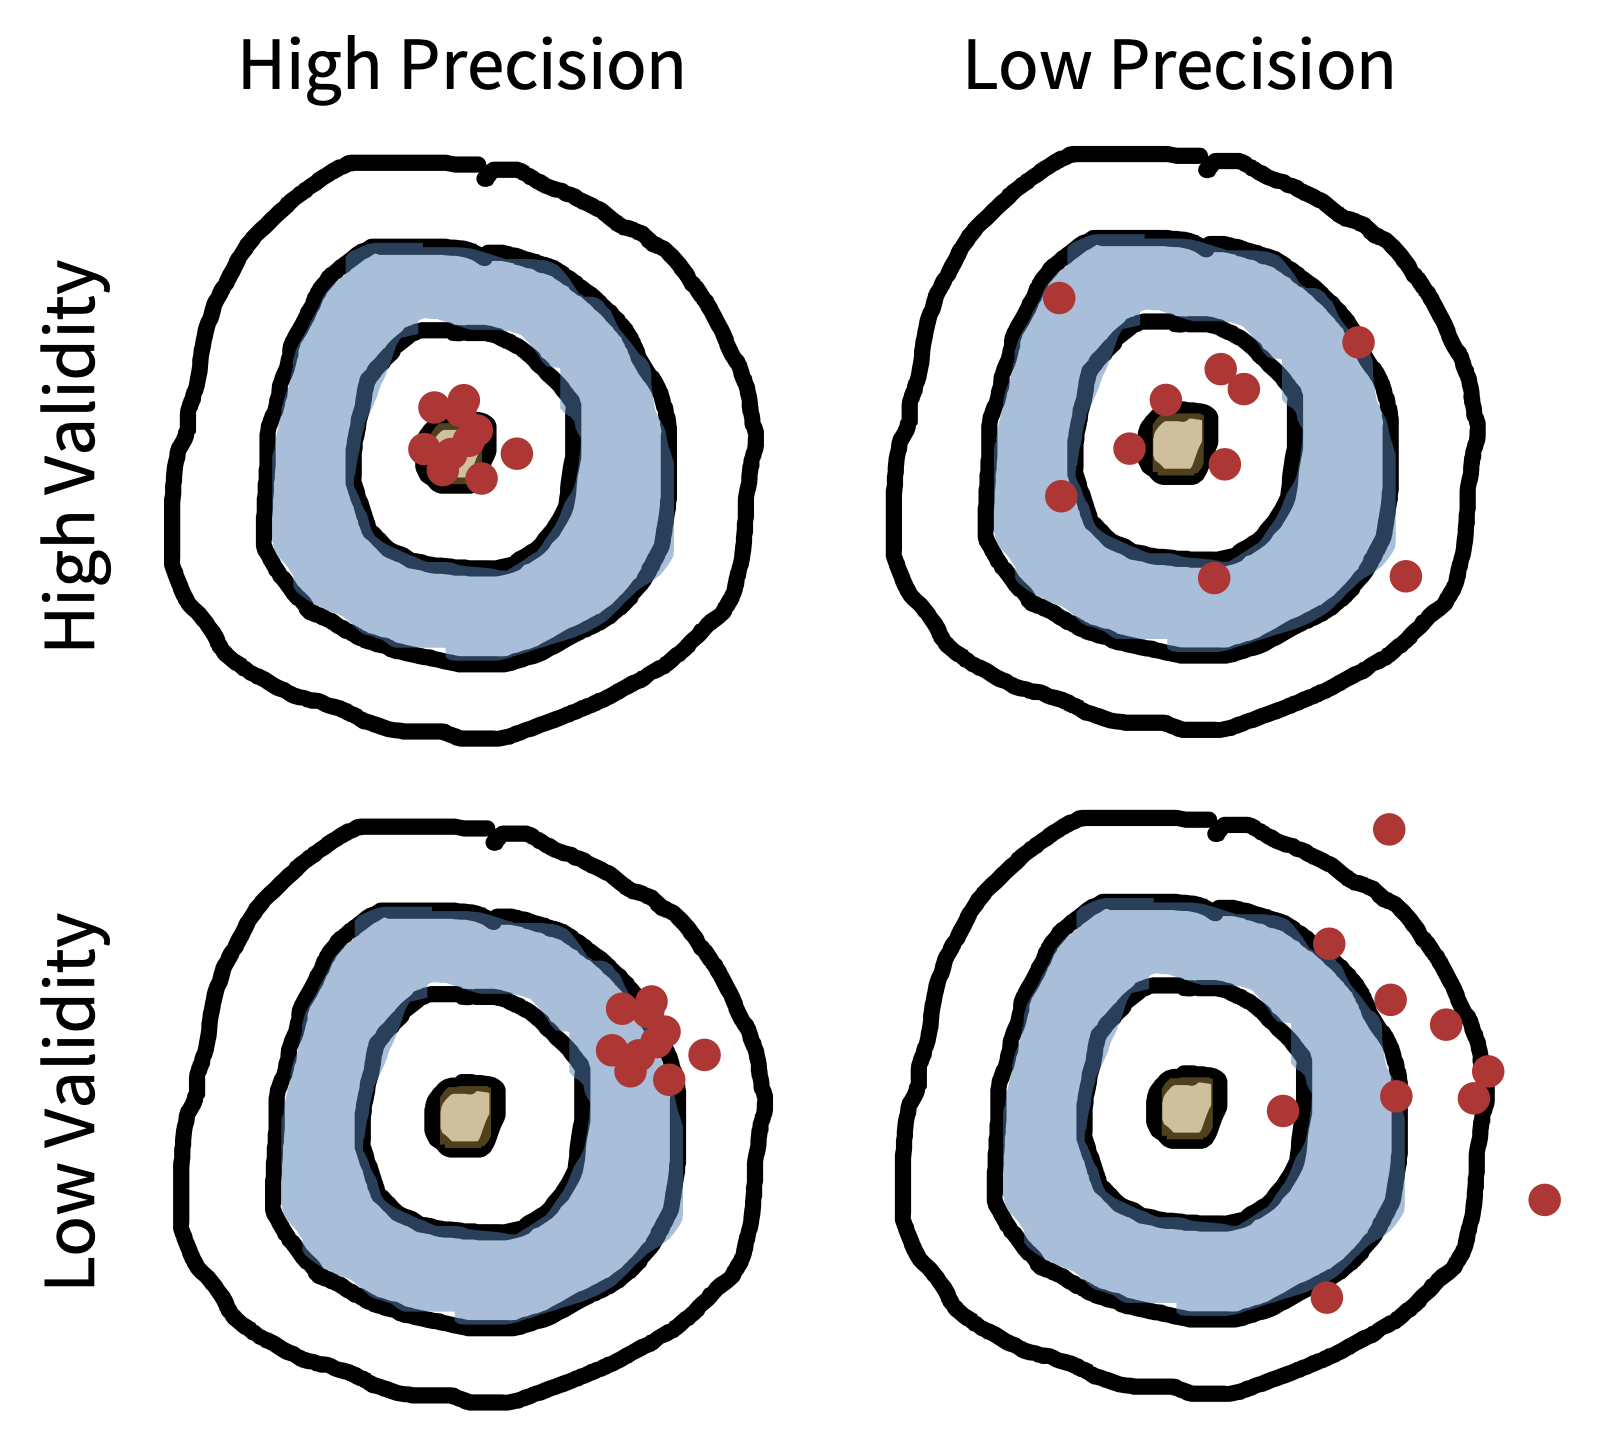 Reliability and validity visualized. The reliability of an instrument is its expected precision. The bias of measurements from an instrument also provide a metaphor for its validity.